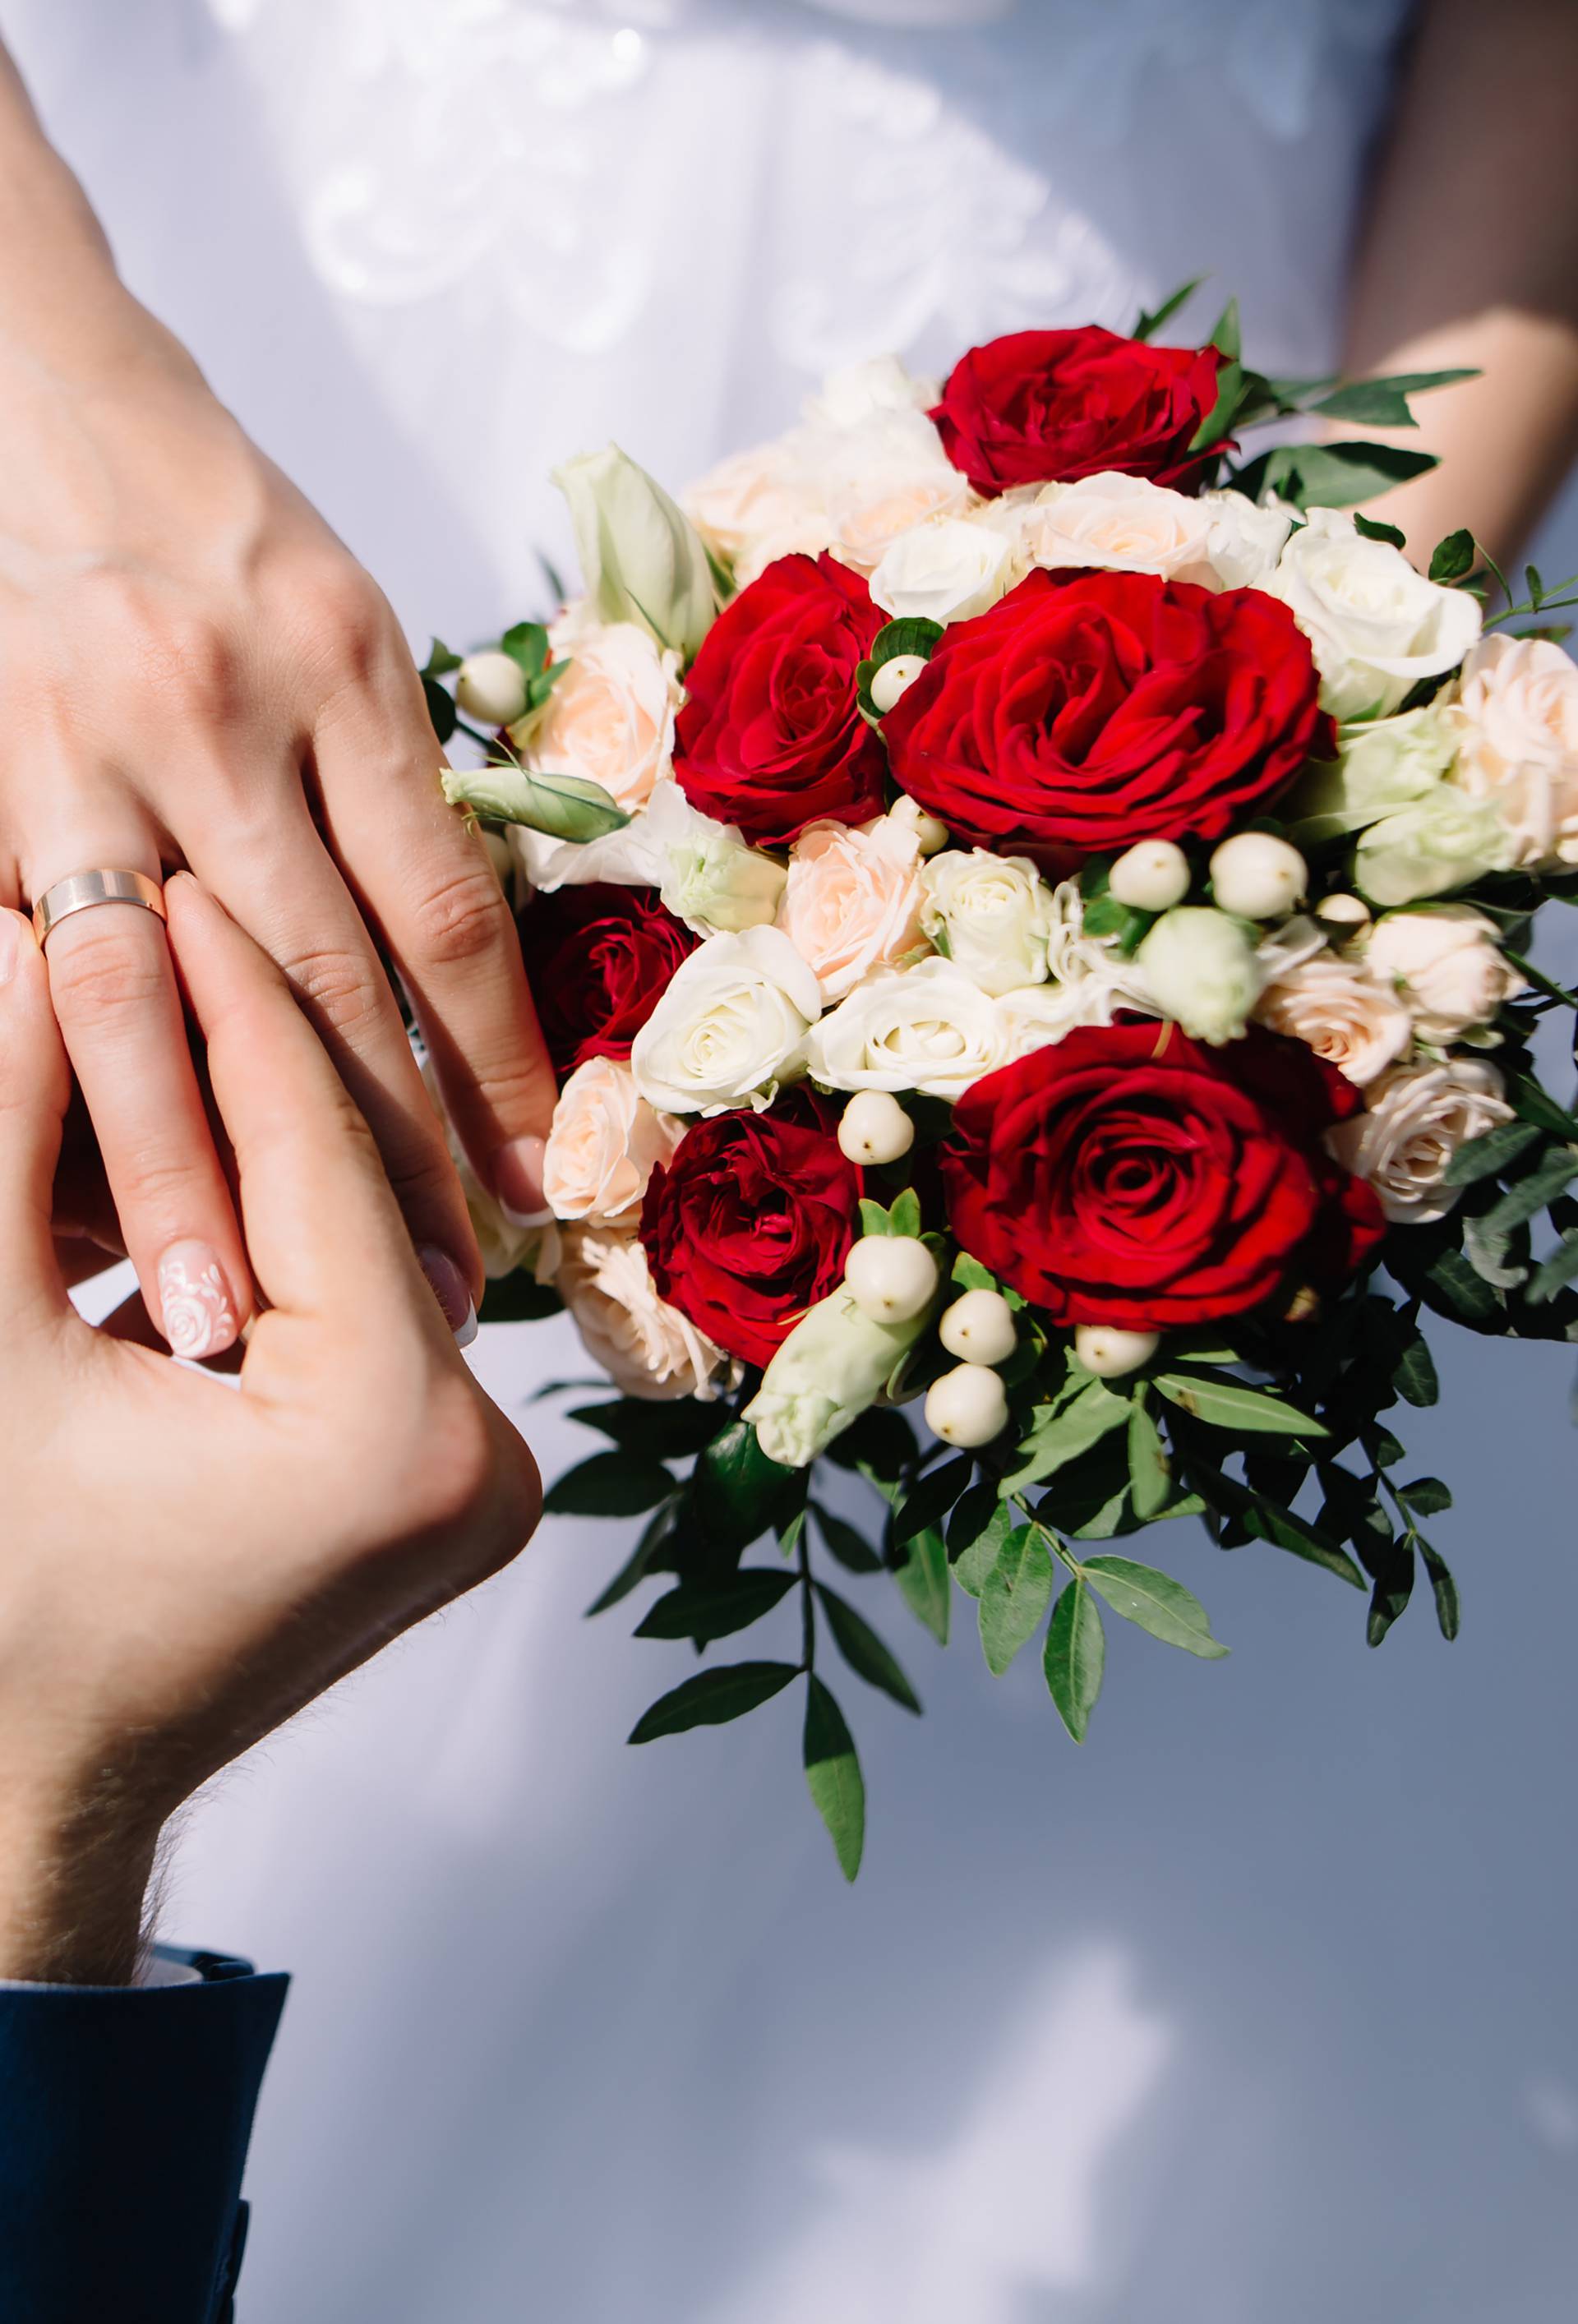 Love and marriage. Fine art rustic wedding ceremony outside. Groom putting golden ring on the bride's finger. Bouquet of red and white roses in hands